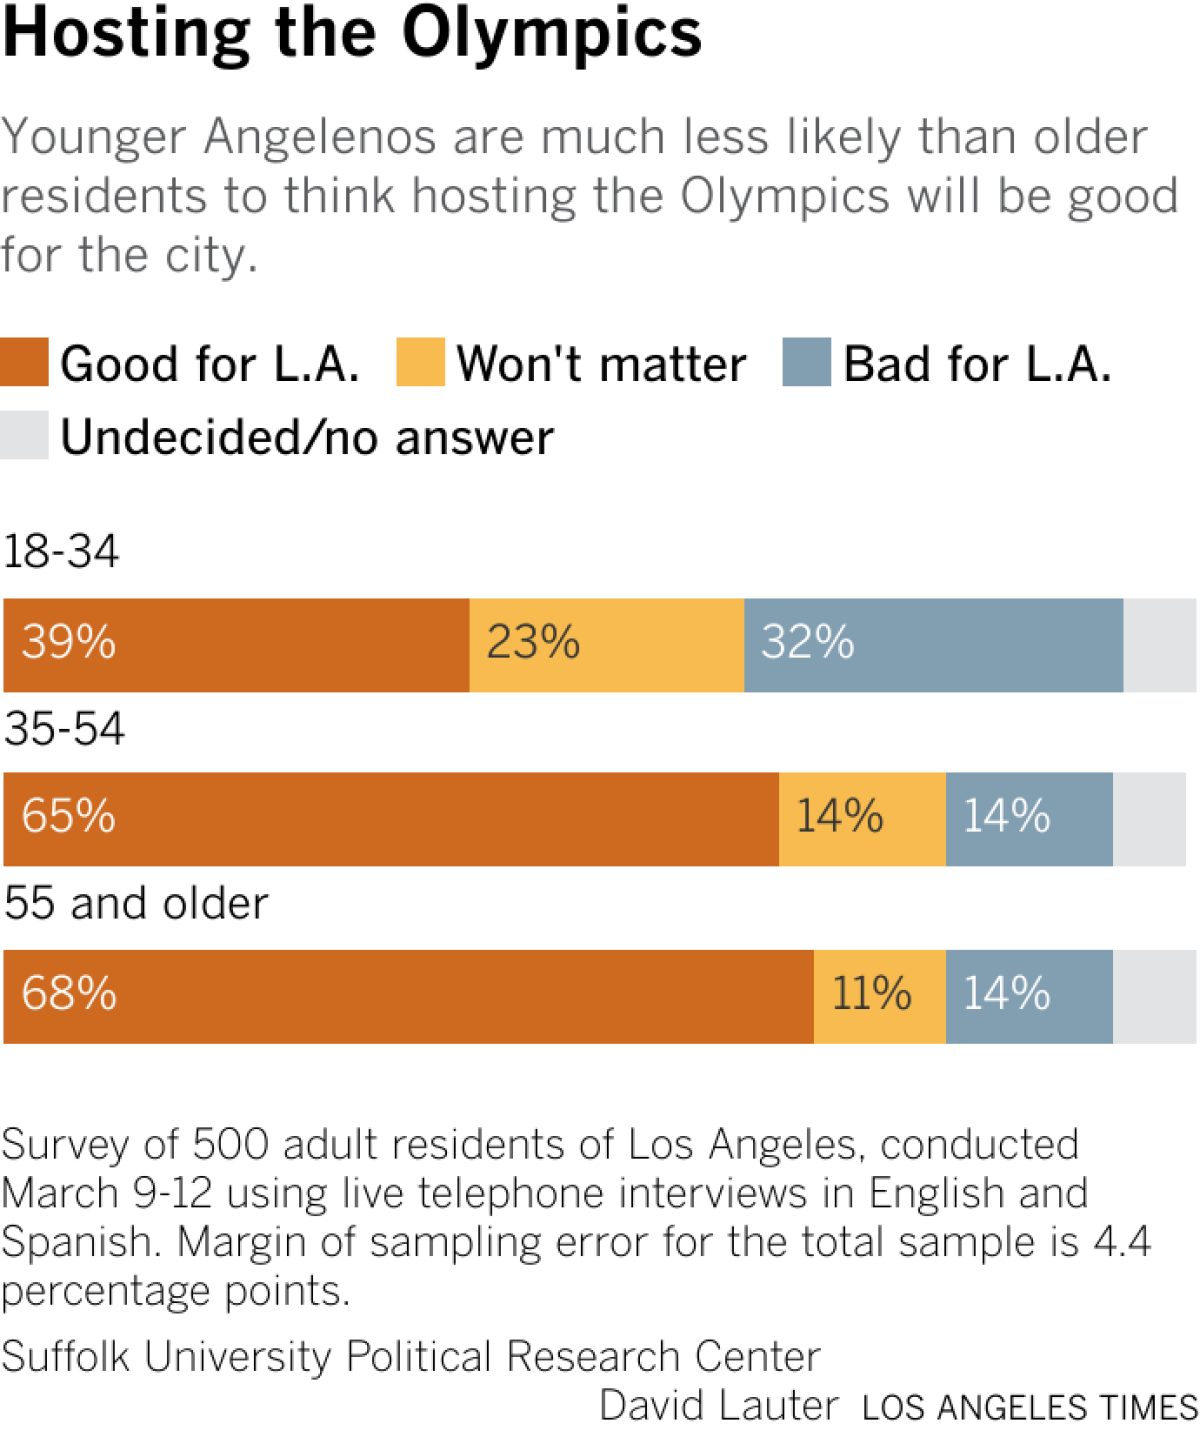 Bars show the share of LA residents who think that hosting the Olympics will be good or bad for the city or make no difference, divided by age.